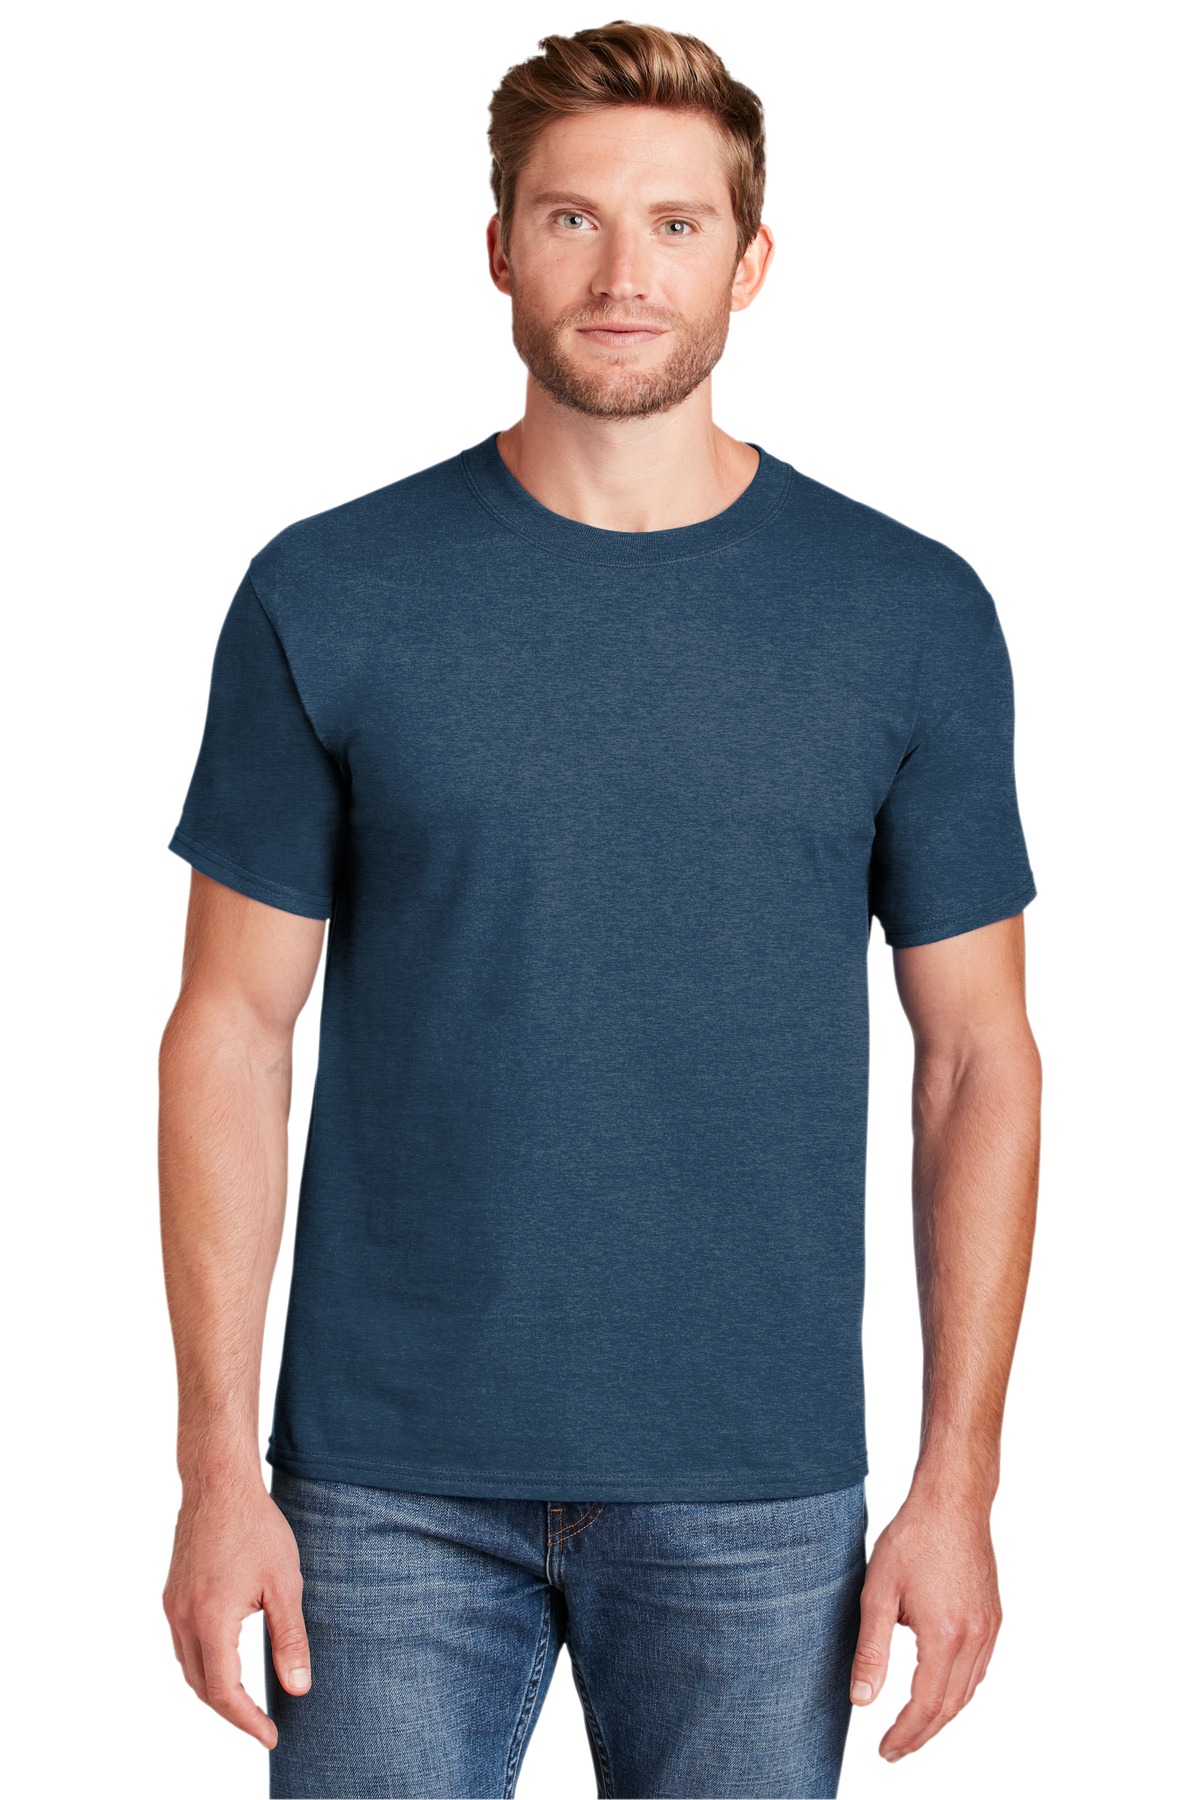 Hanes Beefy-T - 100% Cotton T-Shirt - 5180